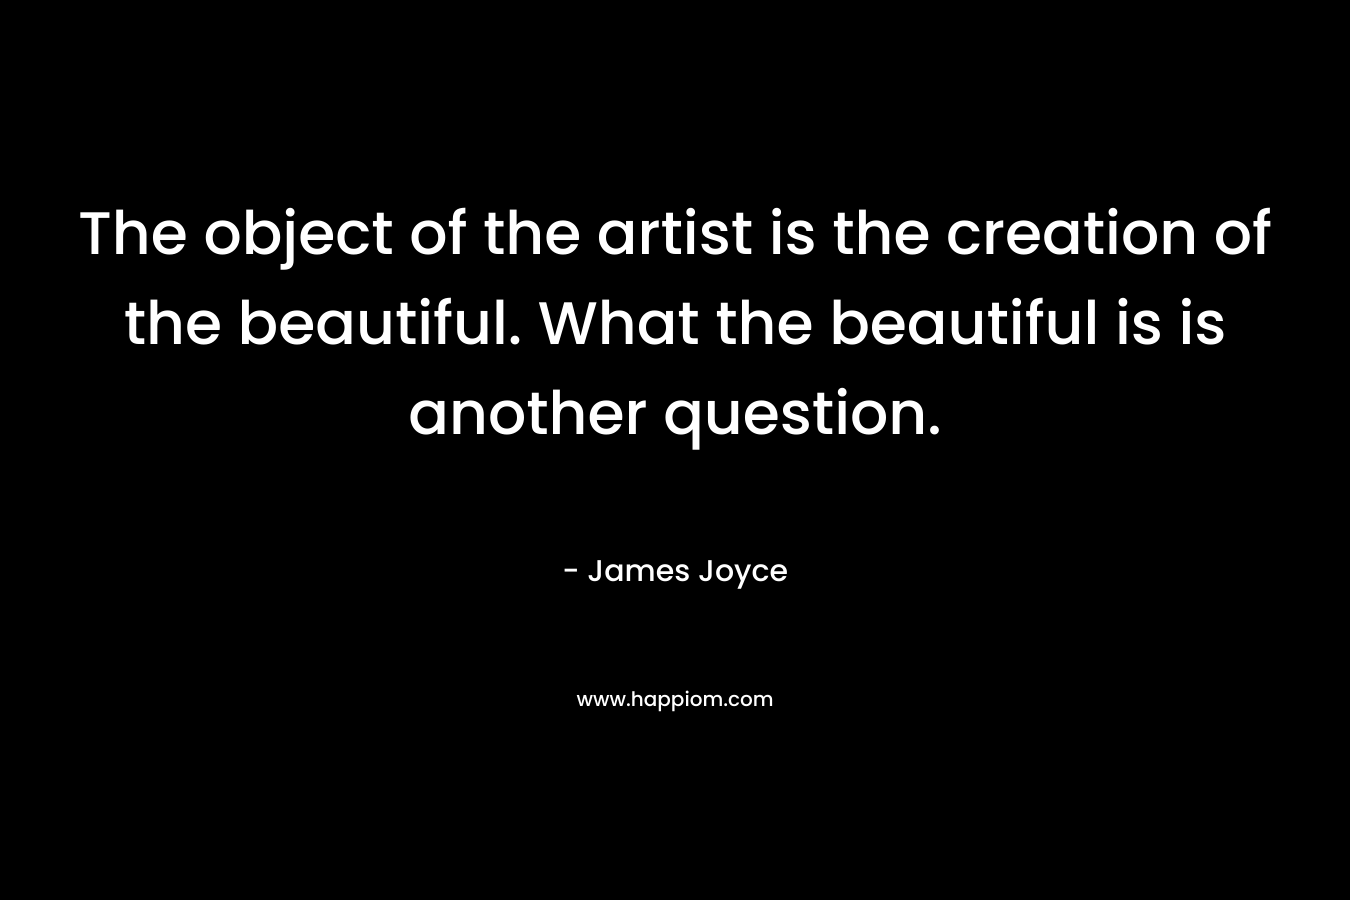 The object of the artist is the creation of the beautiful. What the beautiful is is another question.